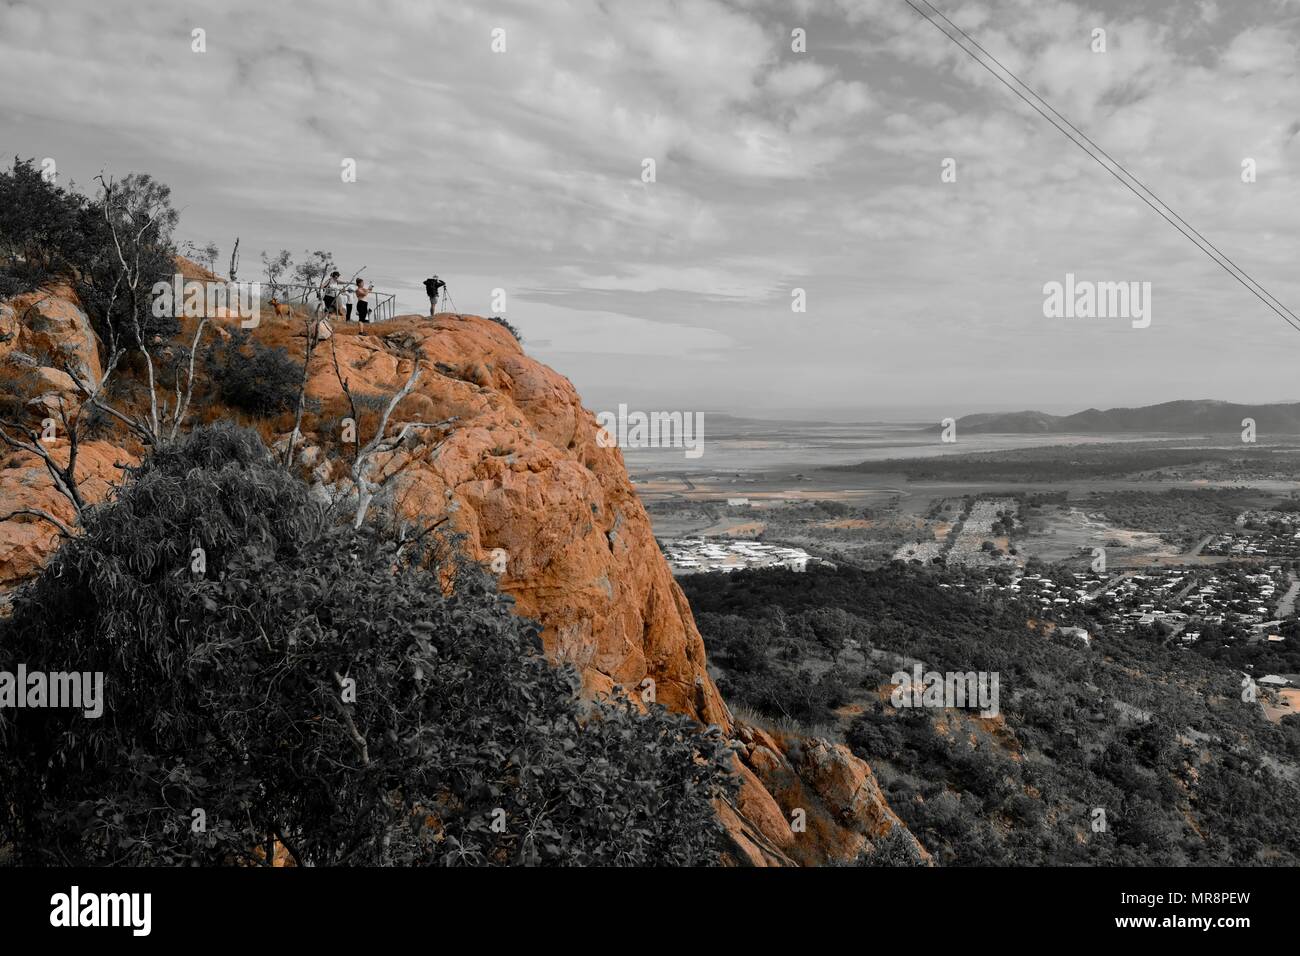 Man taking photograph of Townsville and magnetic island from Castle Hill, Castle Hill QLD 4810, Australia Stock Photo